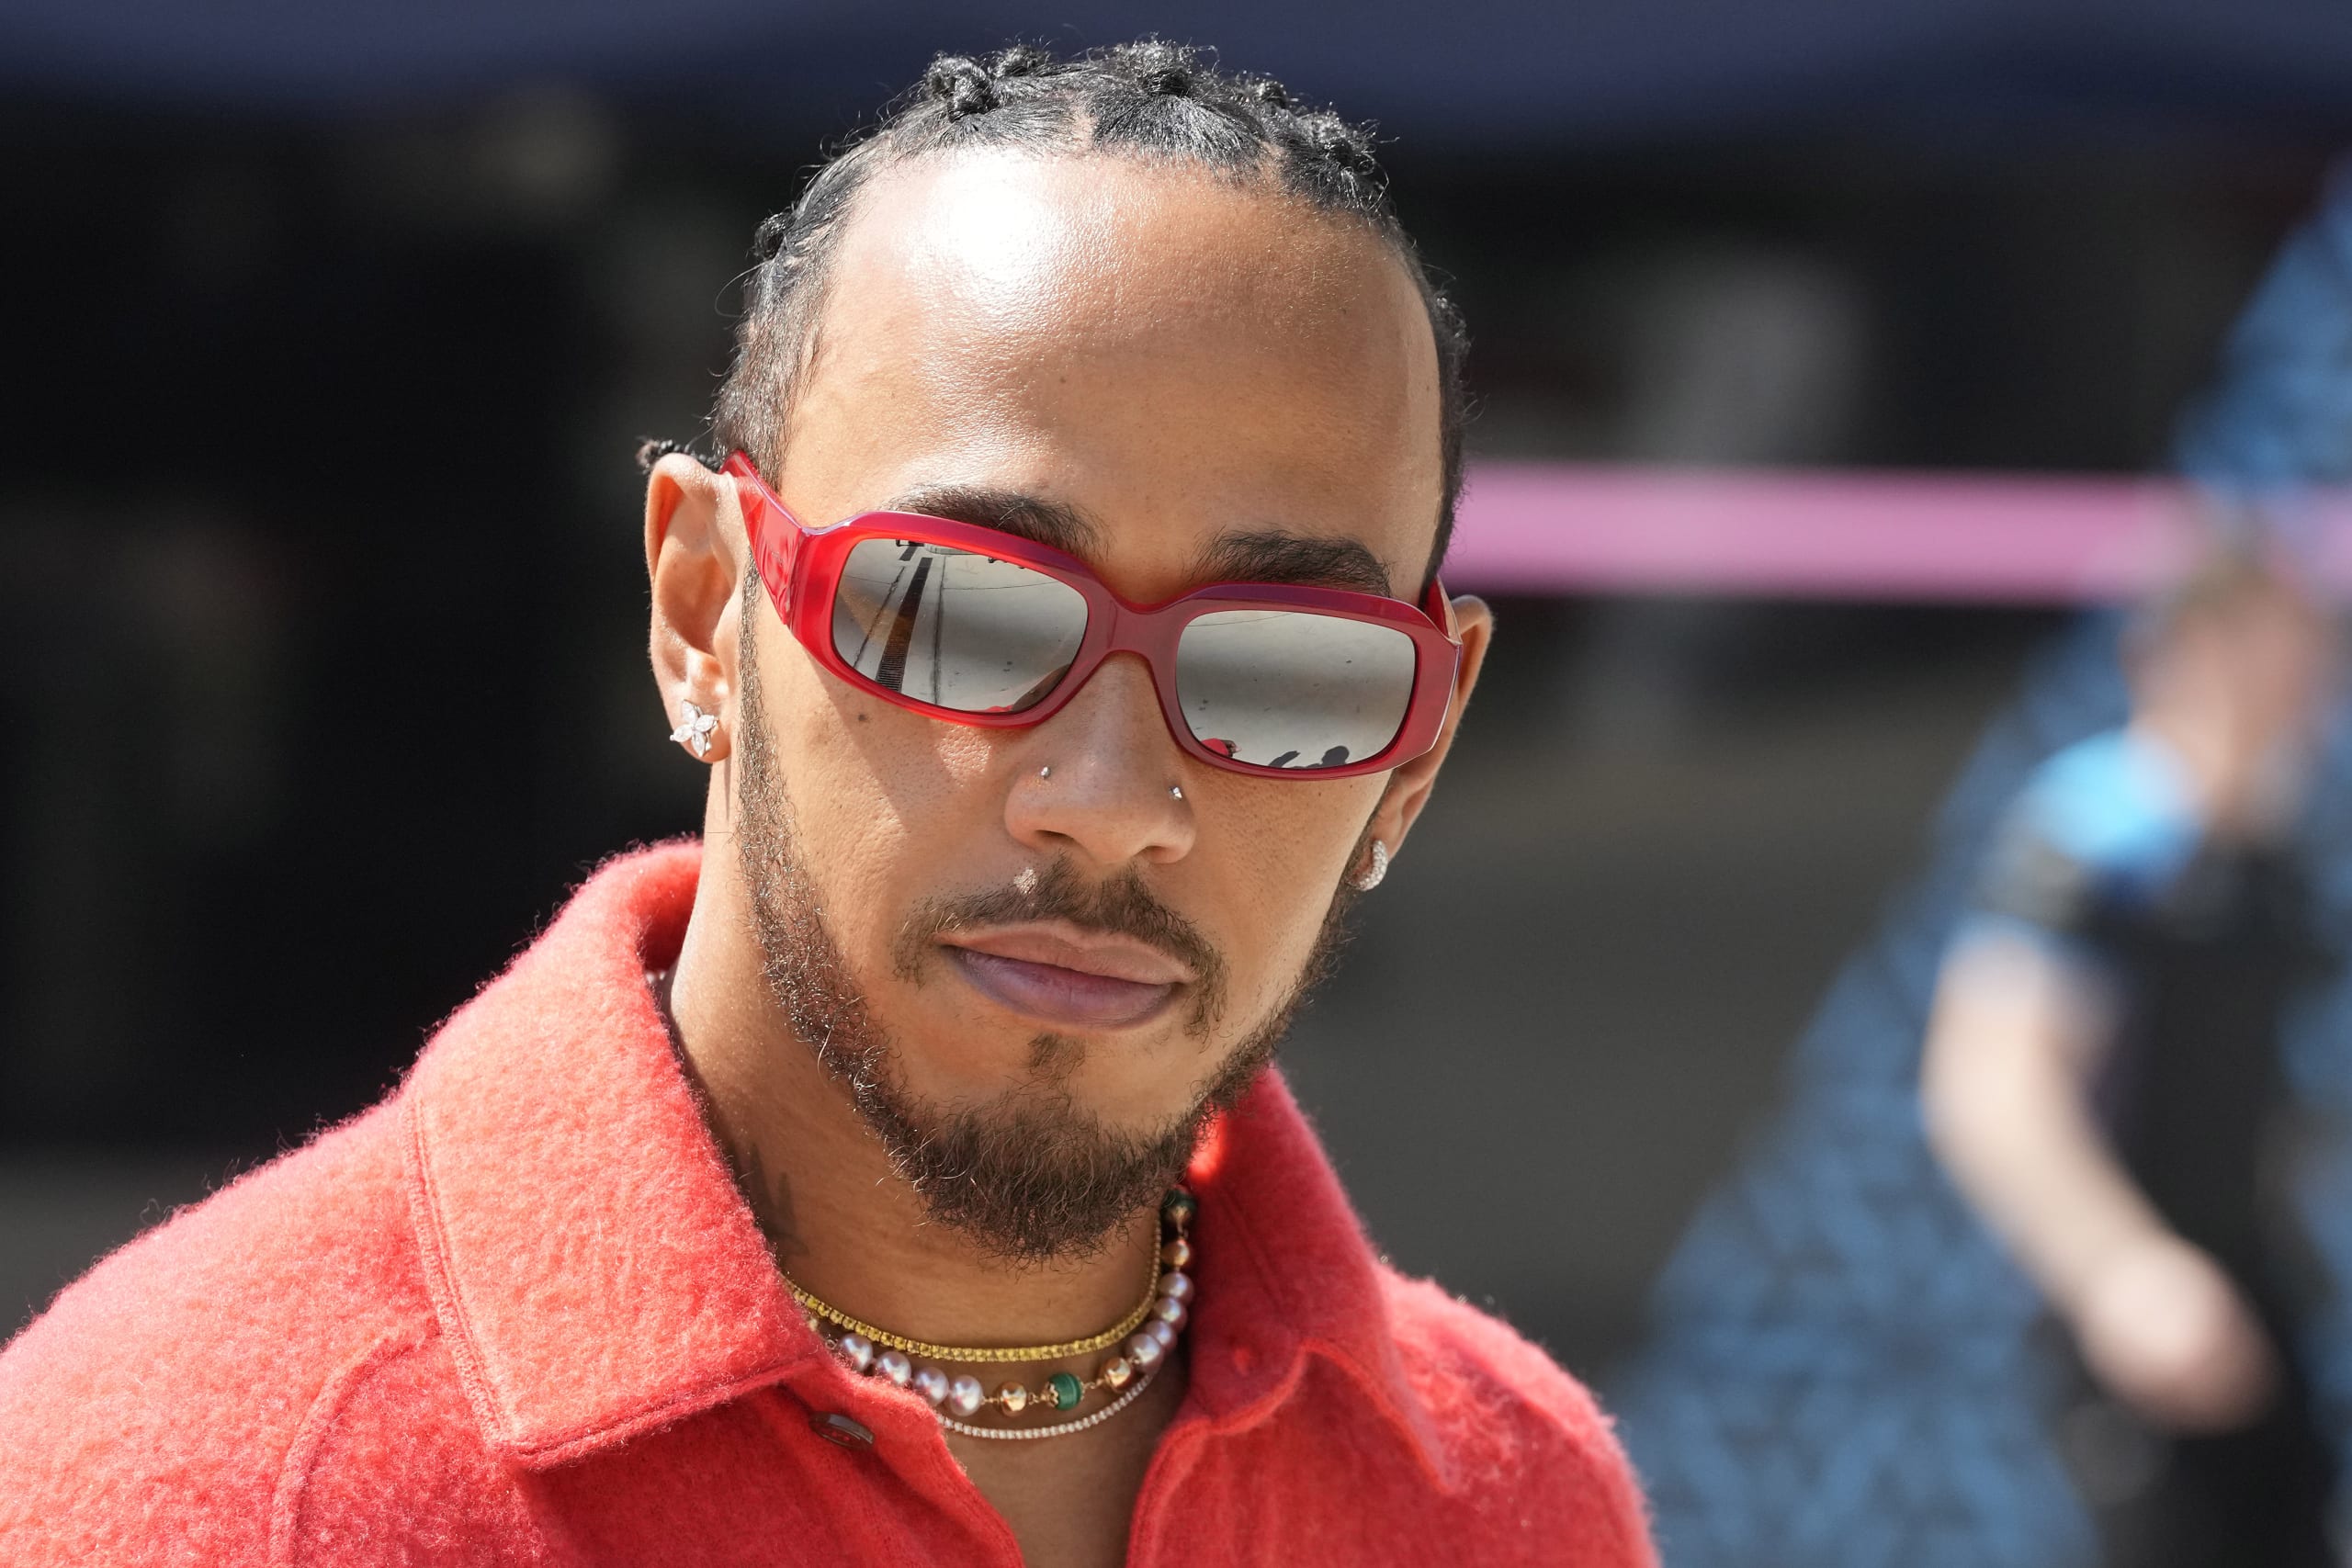 F1 racer Lewis Hamilton undergoes jewelry inspection, addresses nose ring query, gets cleared to race